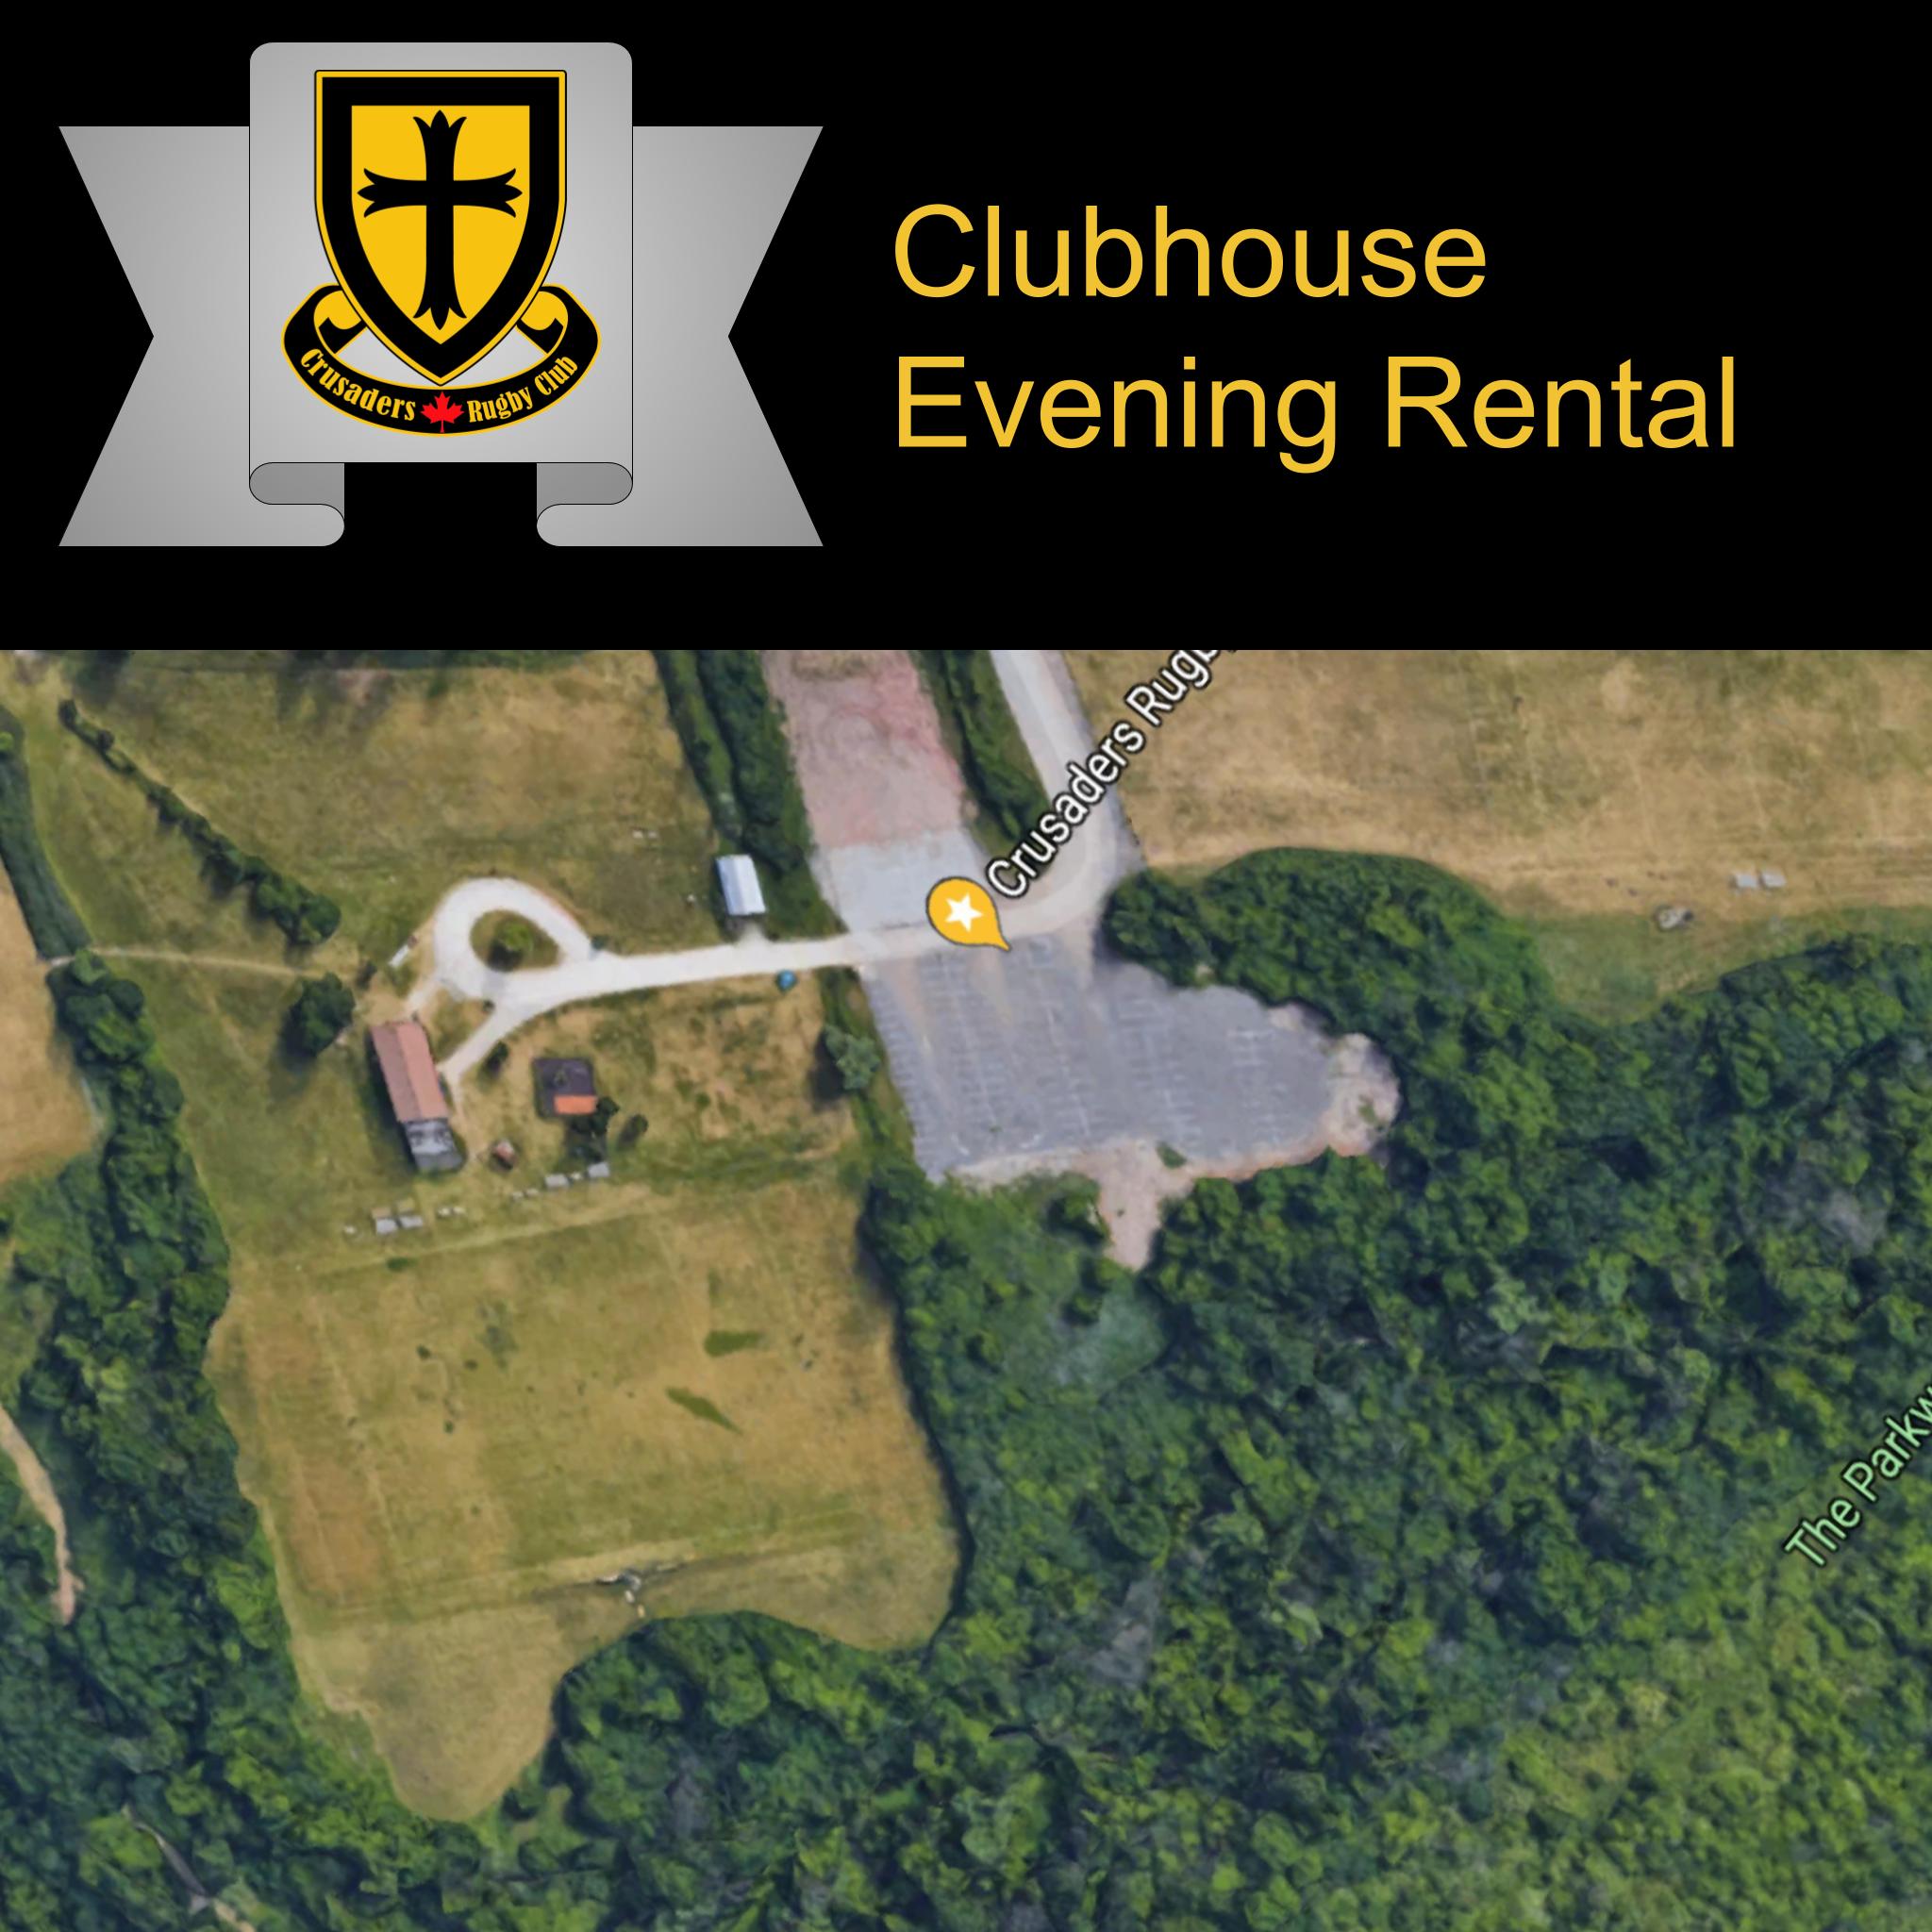 Clubhouse Rental - Evening with Staffed Bar